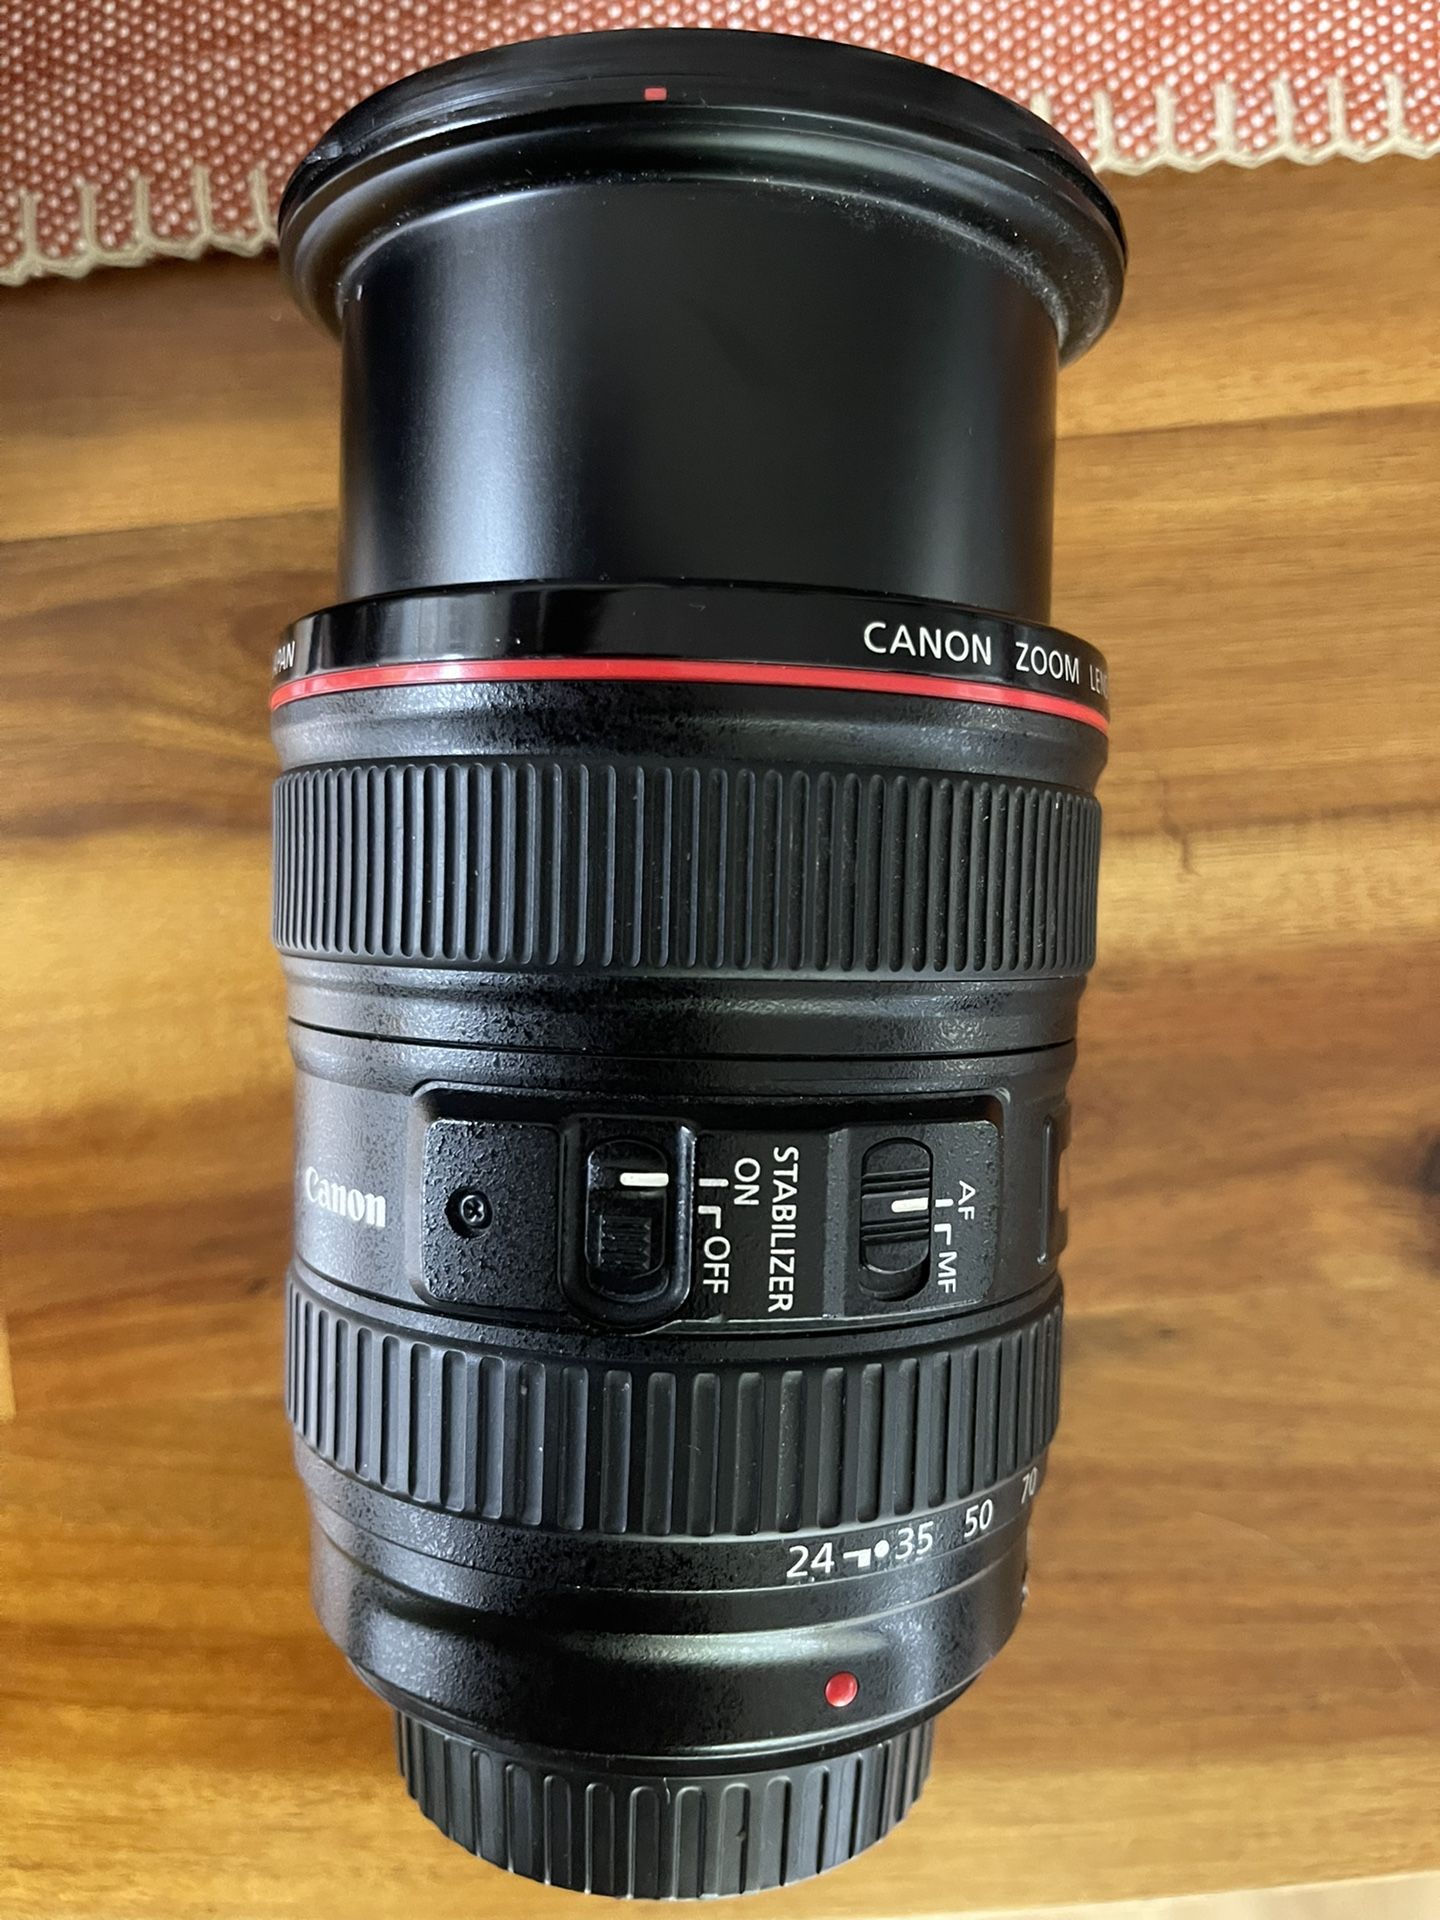 CANON CAMERA LENS AND MICROPHONE 